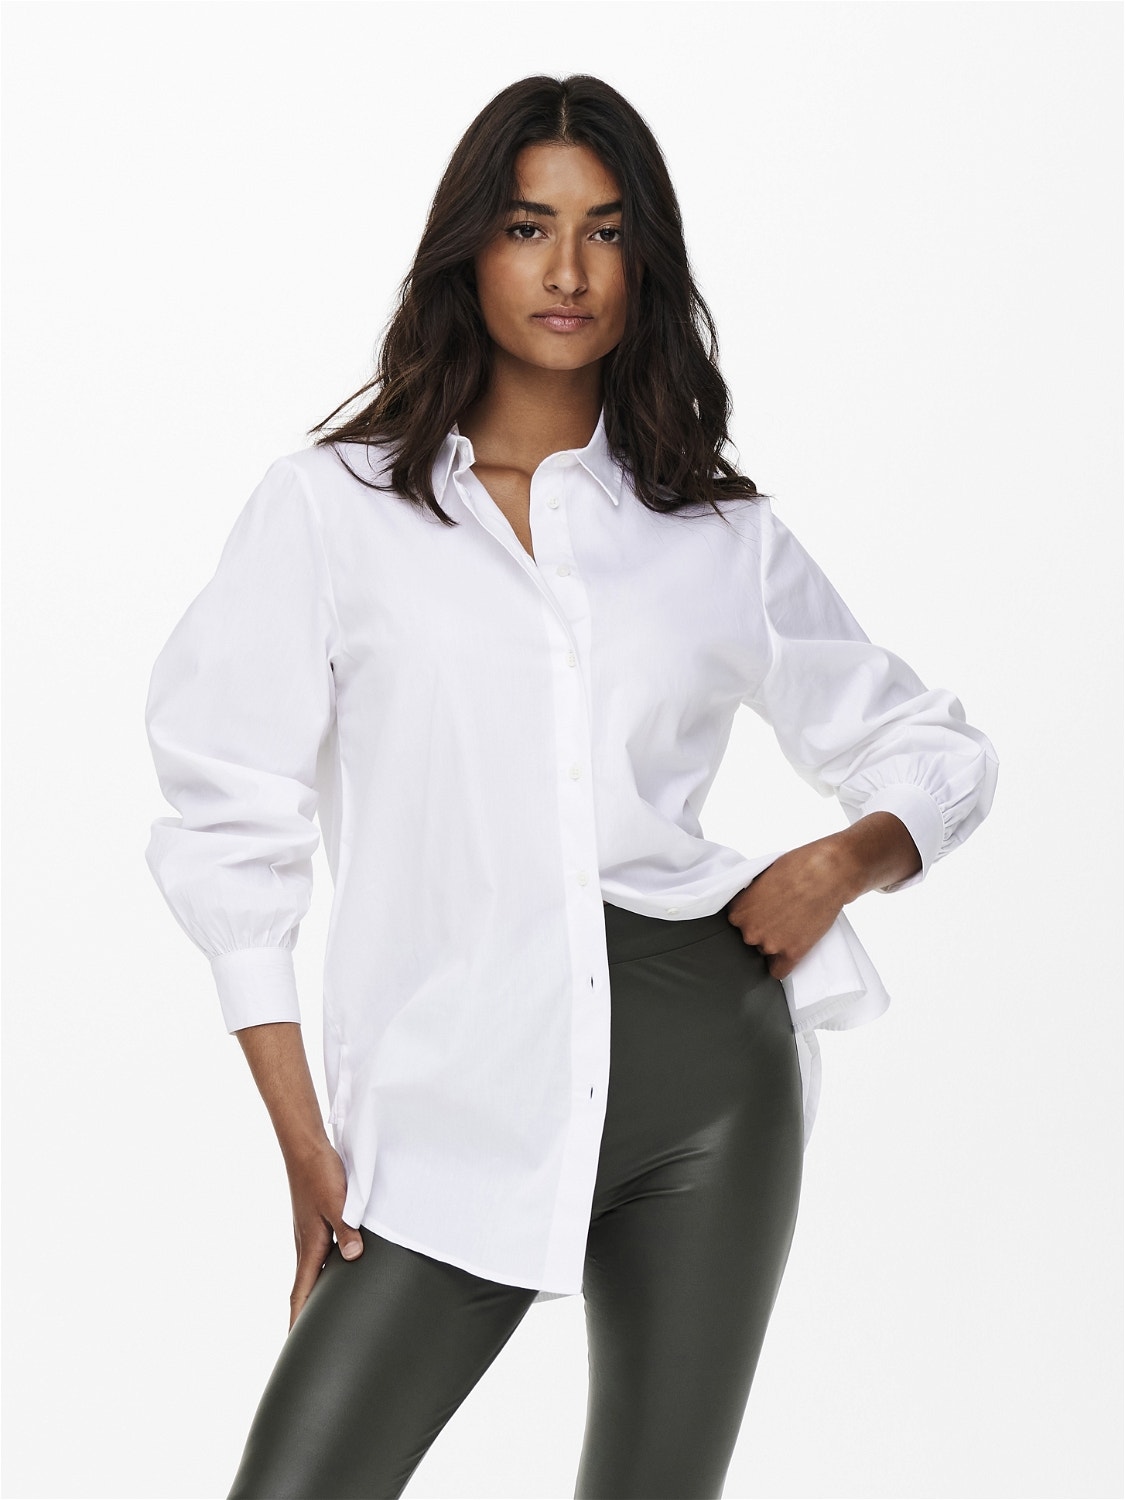 ONLY Classic Shirt -White - 15227677